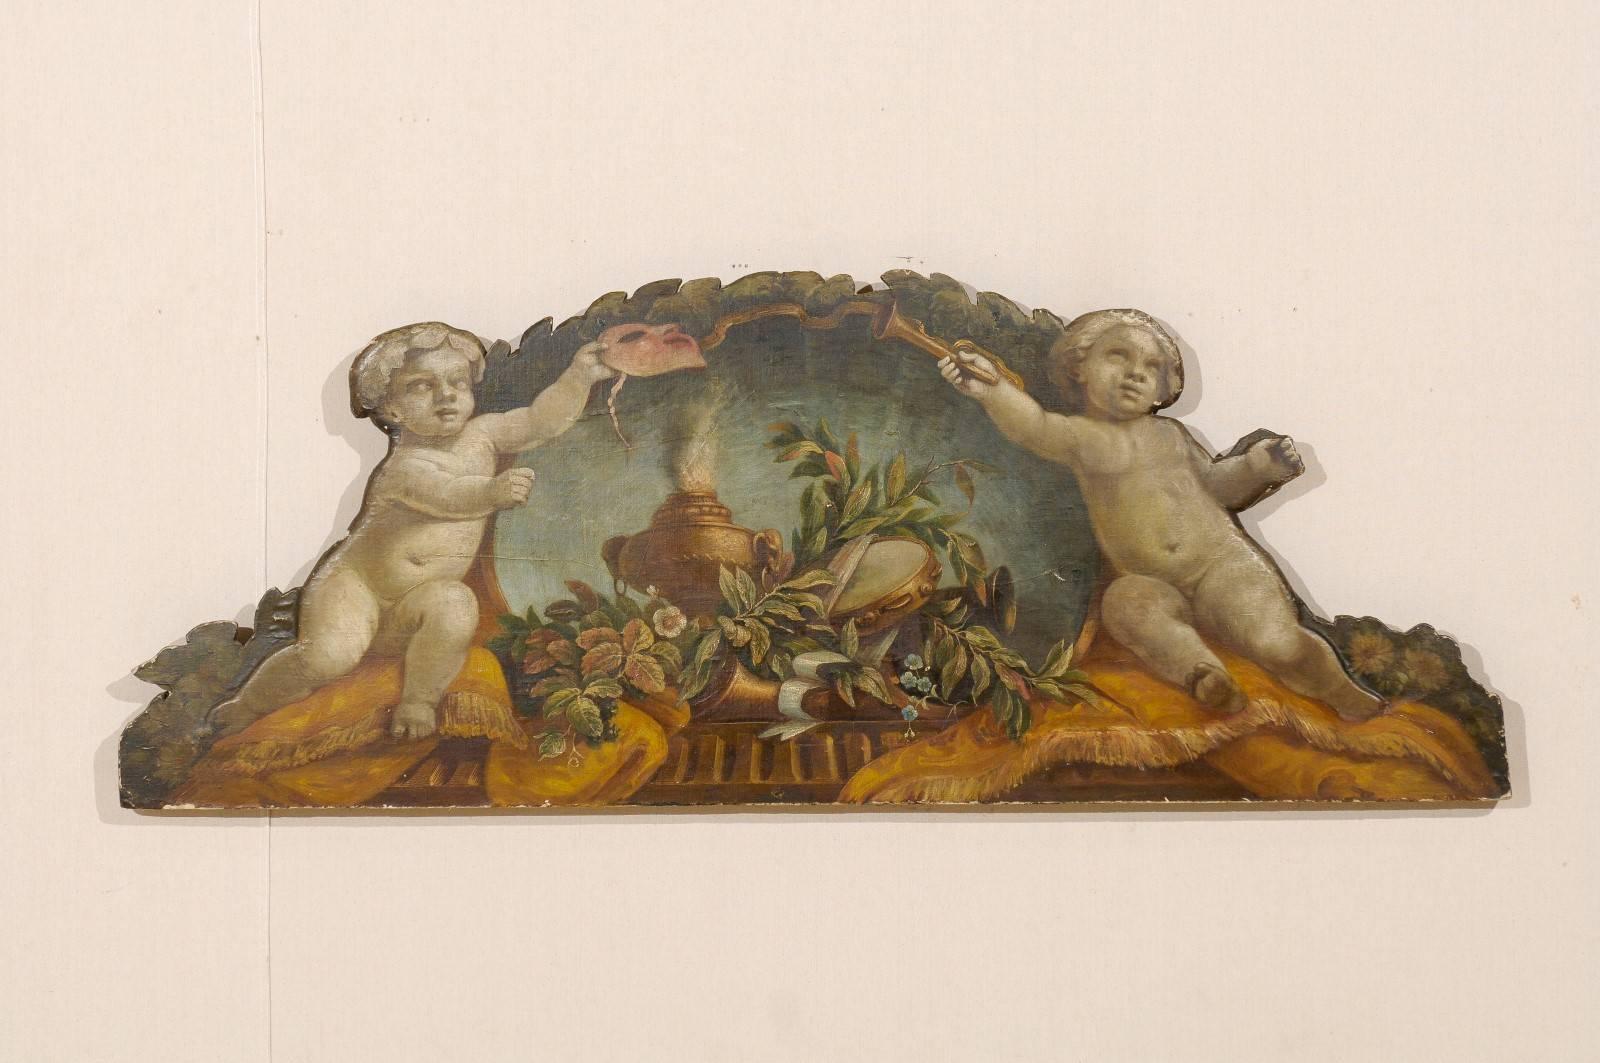 An exquisite 19th century Italian panel. This Italian panel is canvas over wood. It depicts the allegories of music and theater. In this Italian panel careful attention is paid to harmony and balance. Balance and harmony is created through the